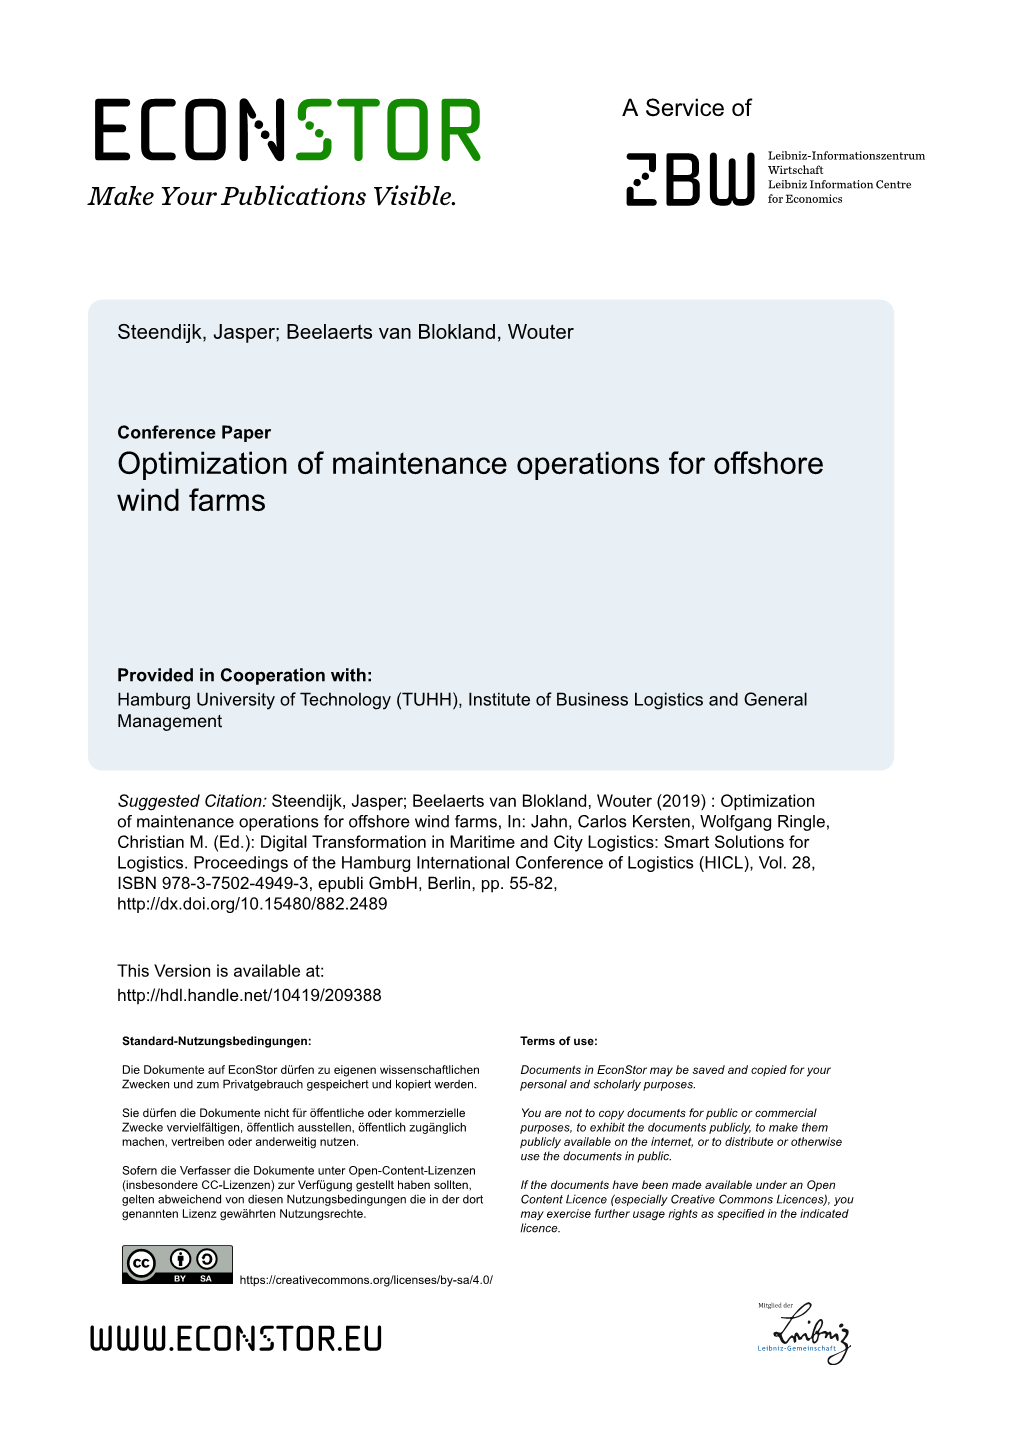 Optimization of Maintenance Operations for Offshore Wind Farms